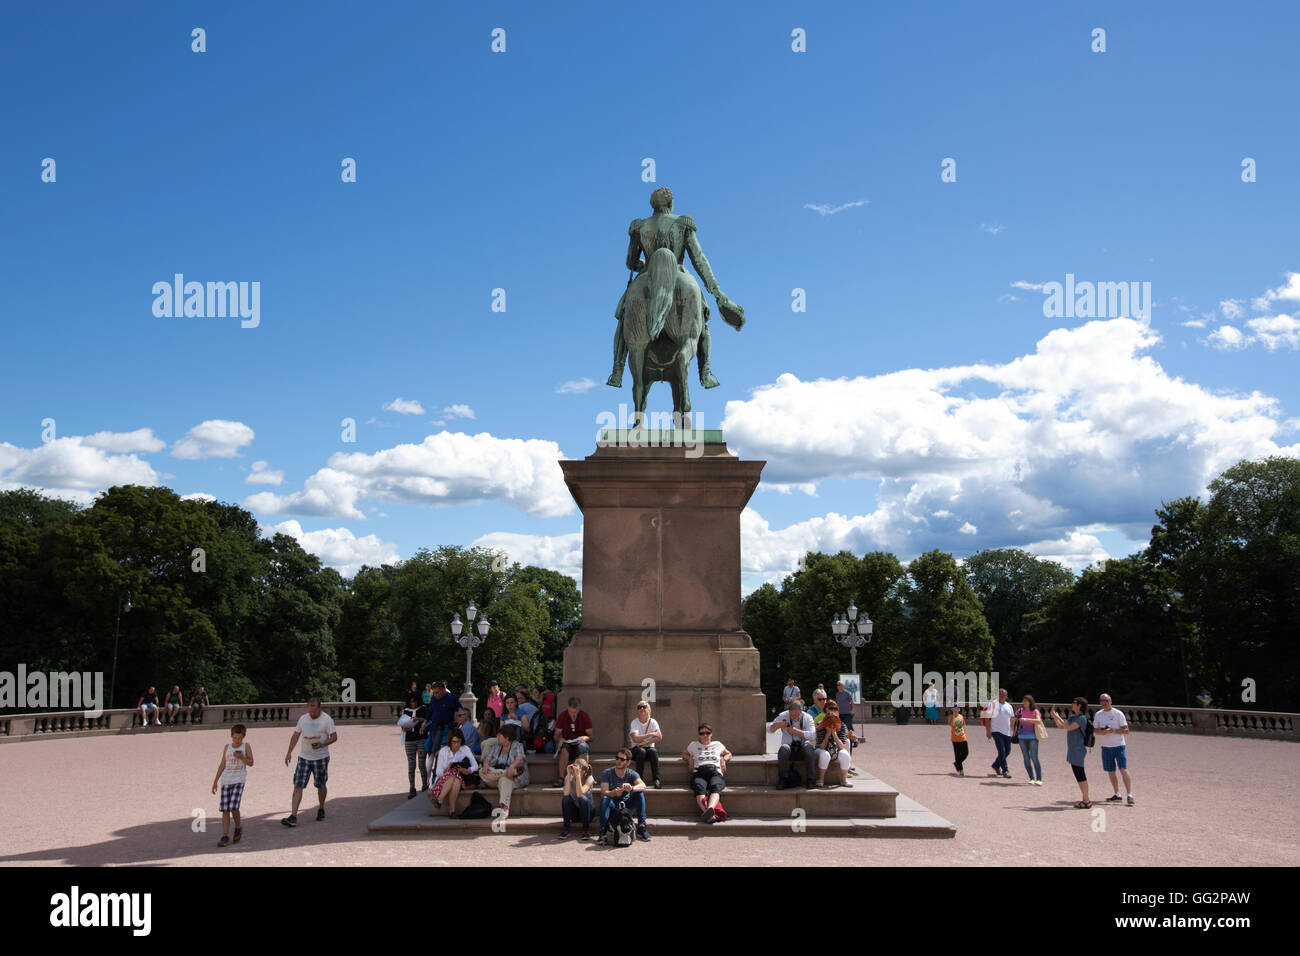 Statue of Carl Johan in front The Royal Palace, official residence of the present Norwegian monarch King Harald V, Oslo, Norway Stock Photo